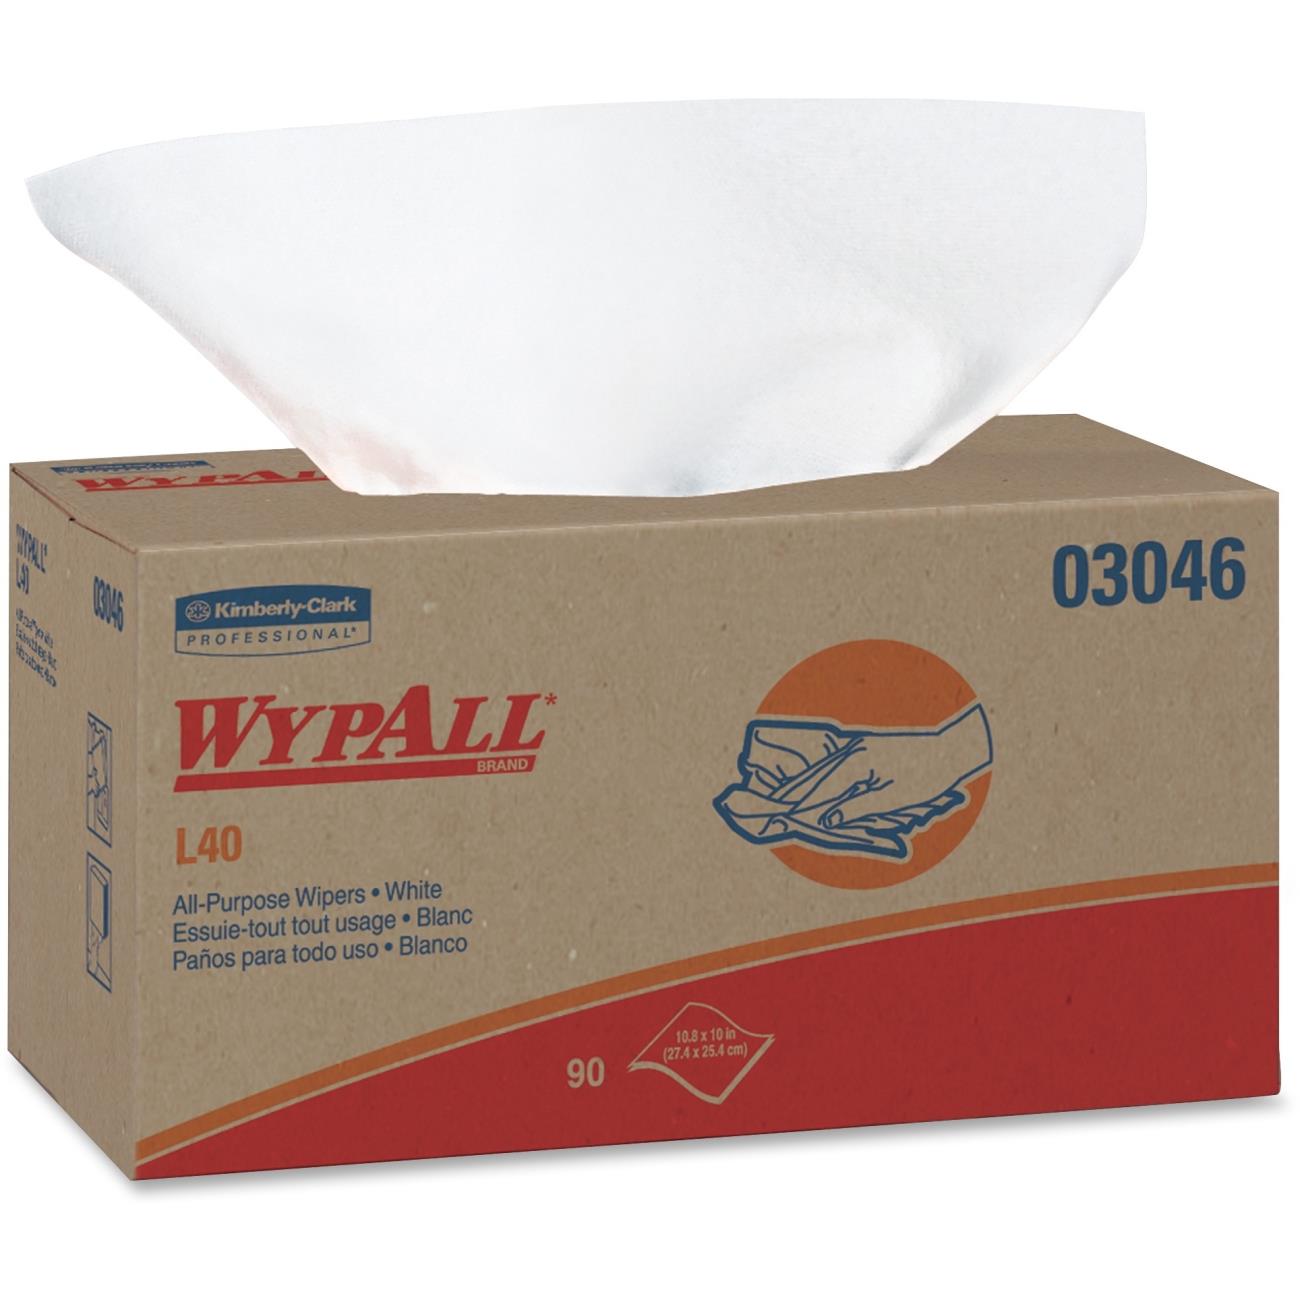 WYPALL L40 POP-UP BOX WHITE 90 WIPERS - WYPALL L40